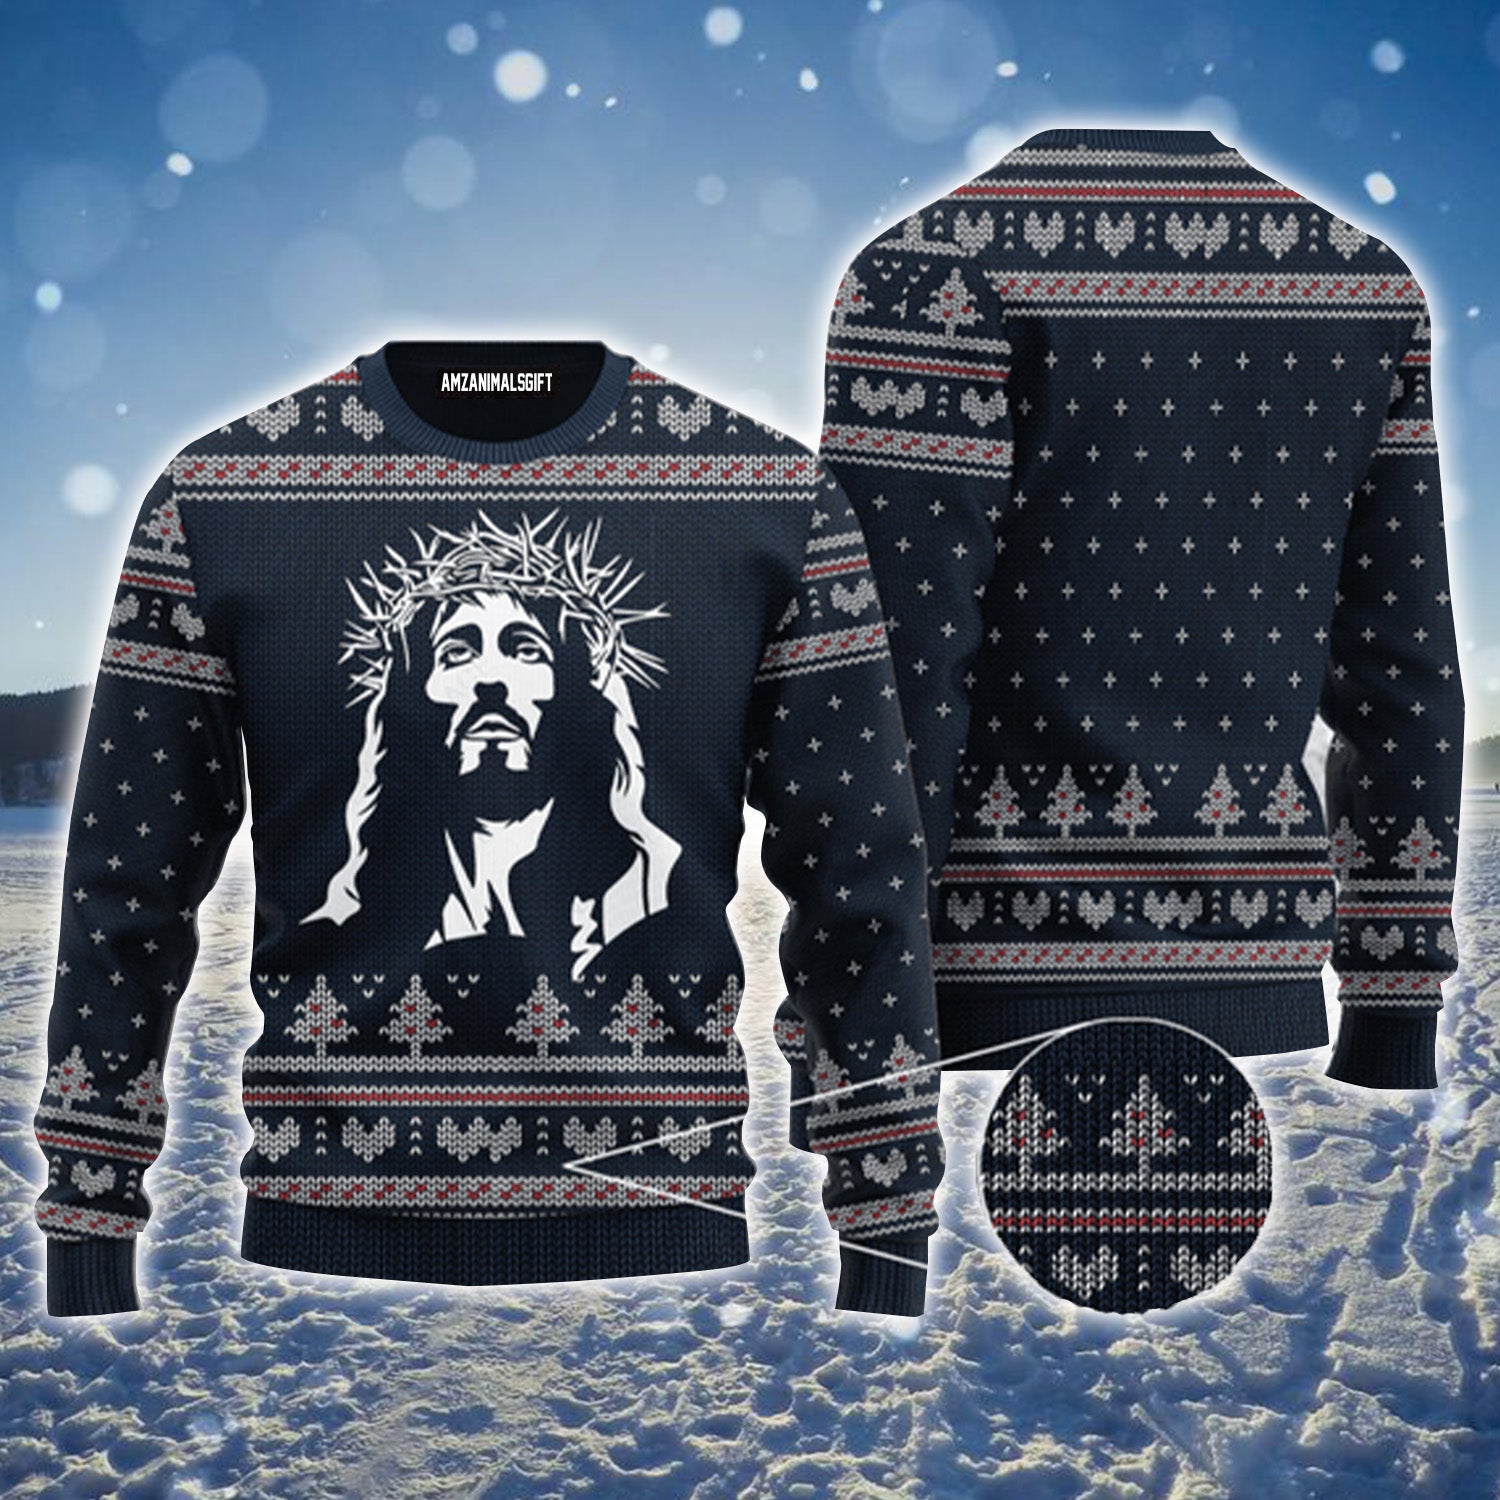 Christ Jesus Urly Sweater, Christmas Sweater For Men & Women - Perfect Gift For New Year, Winter, Christmas